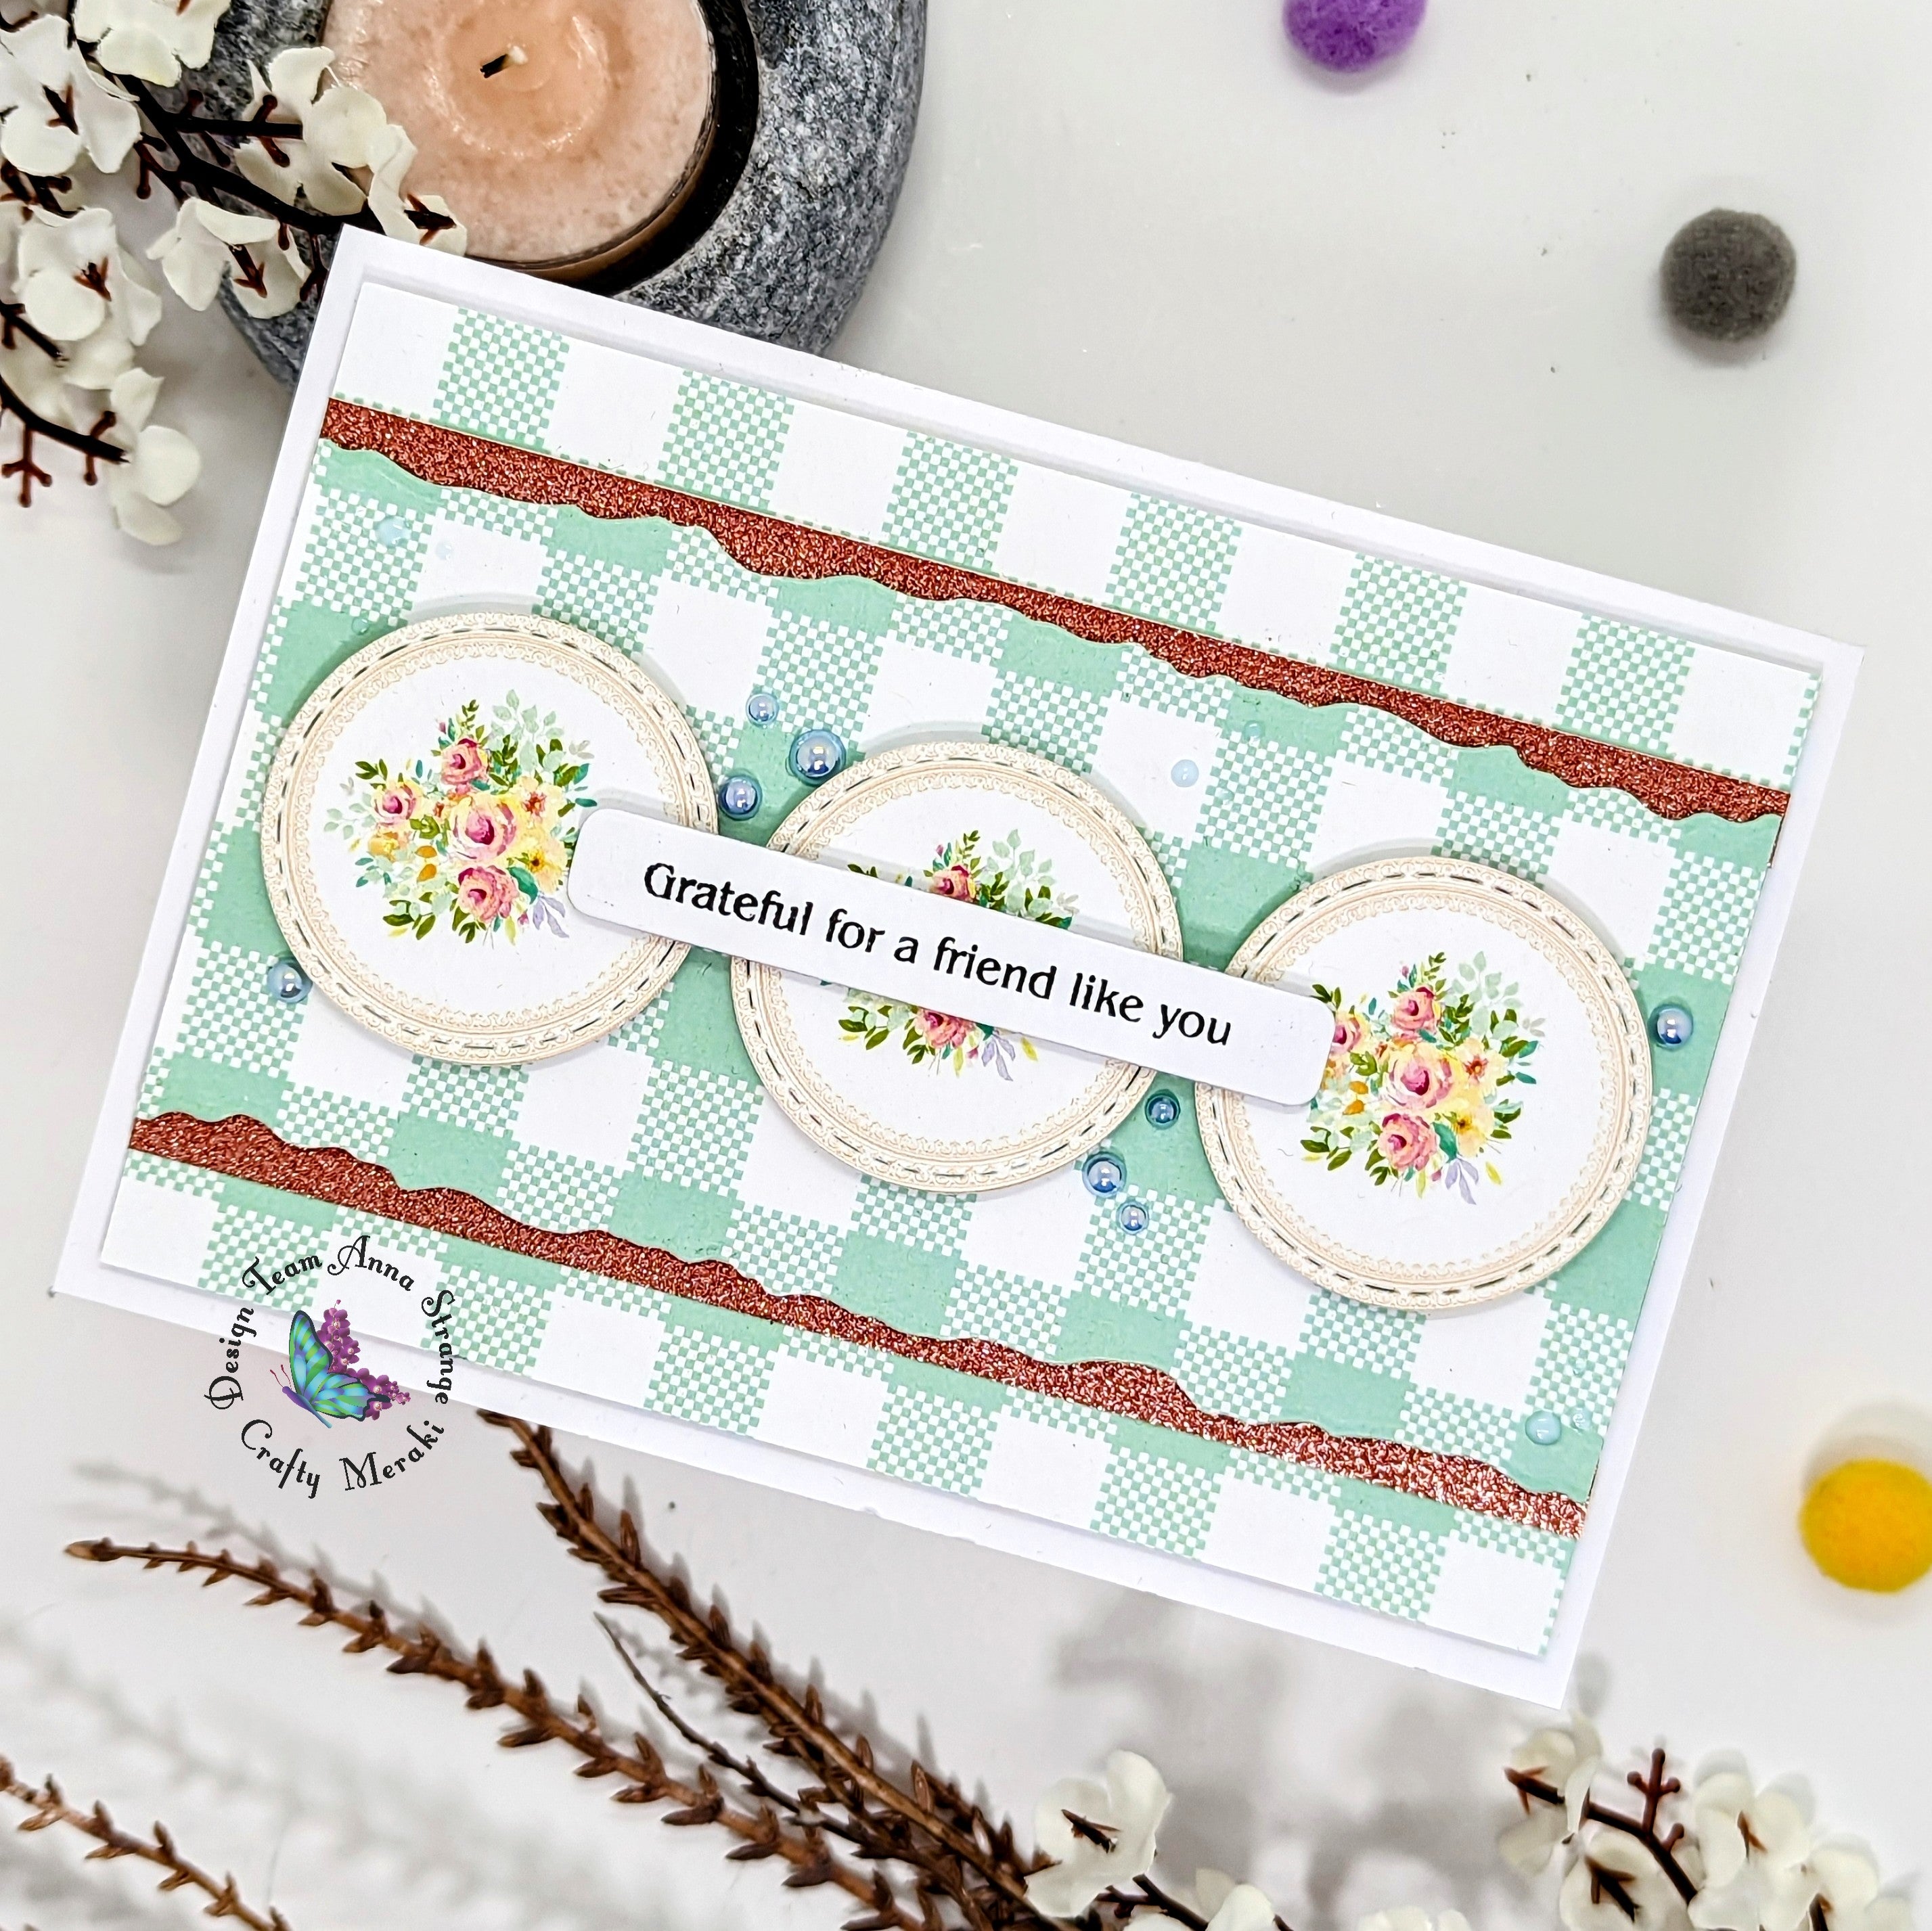 Cardmaking with pattern paper by Anna